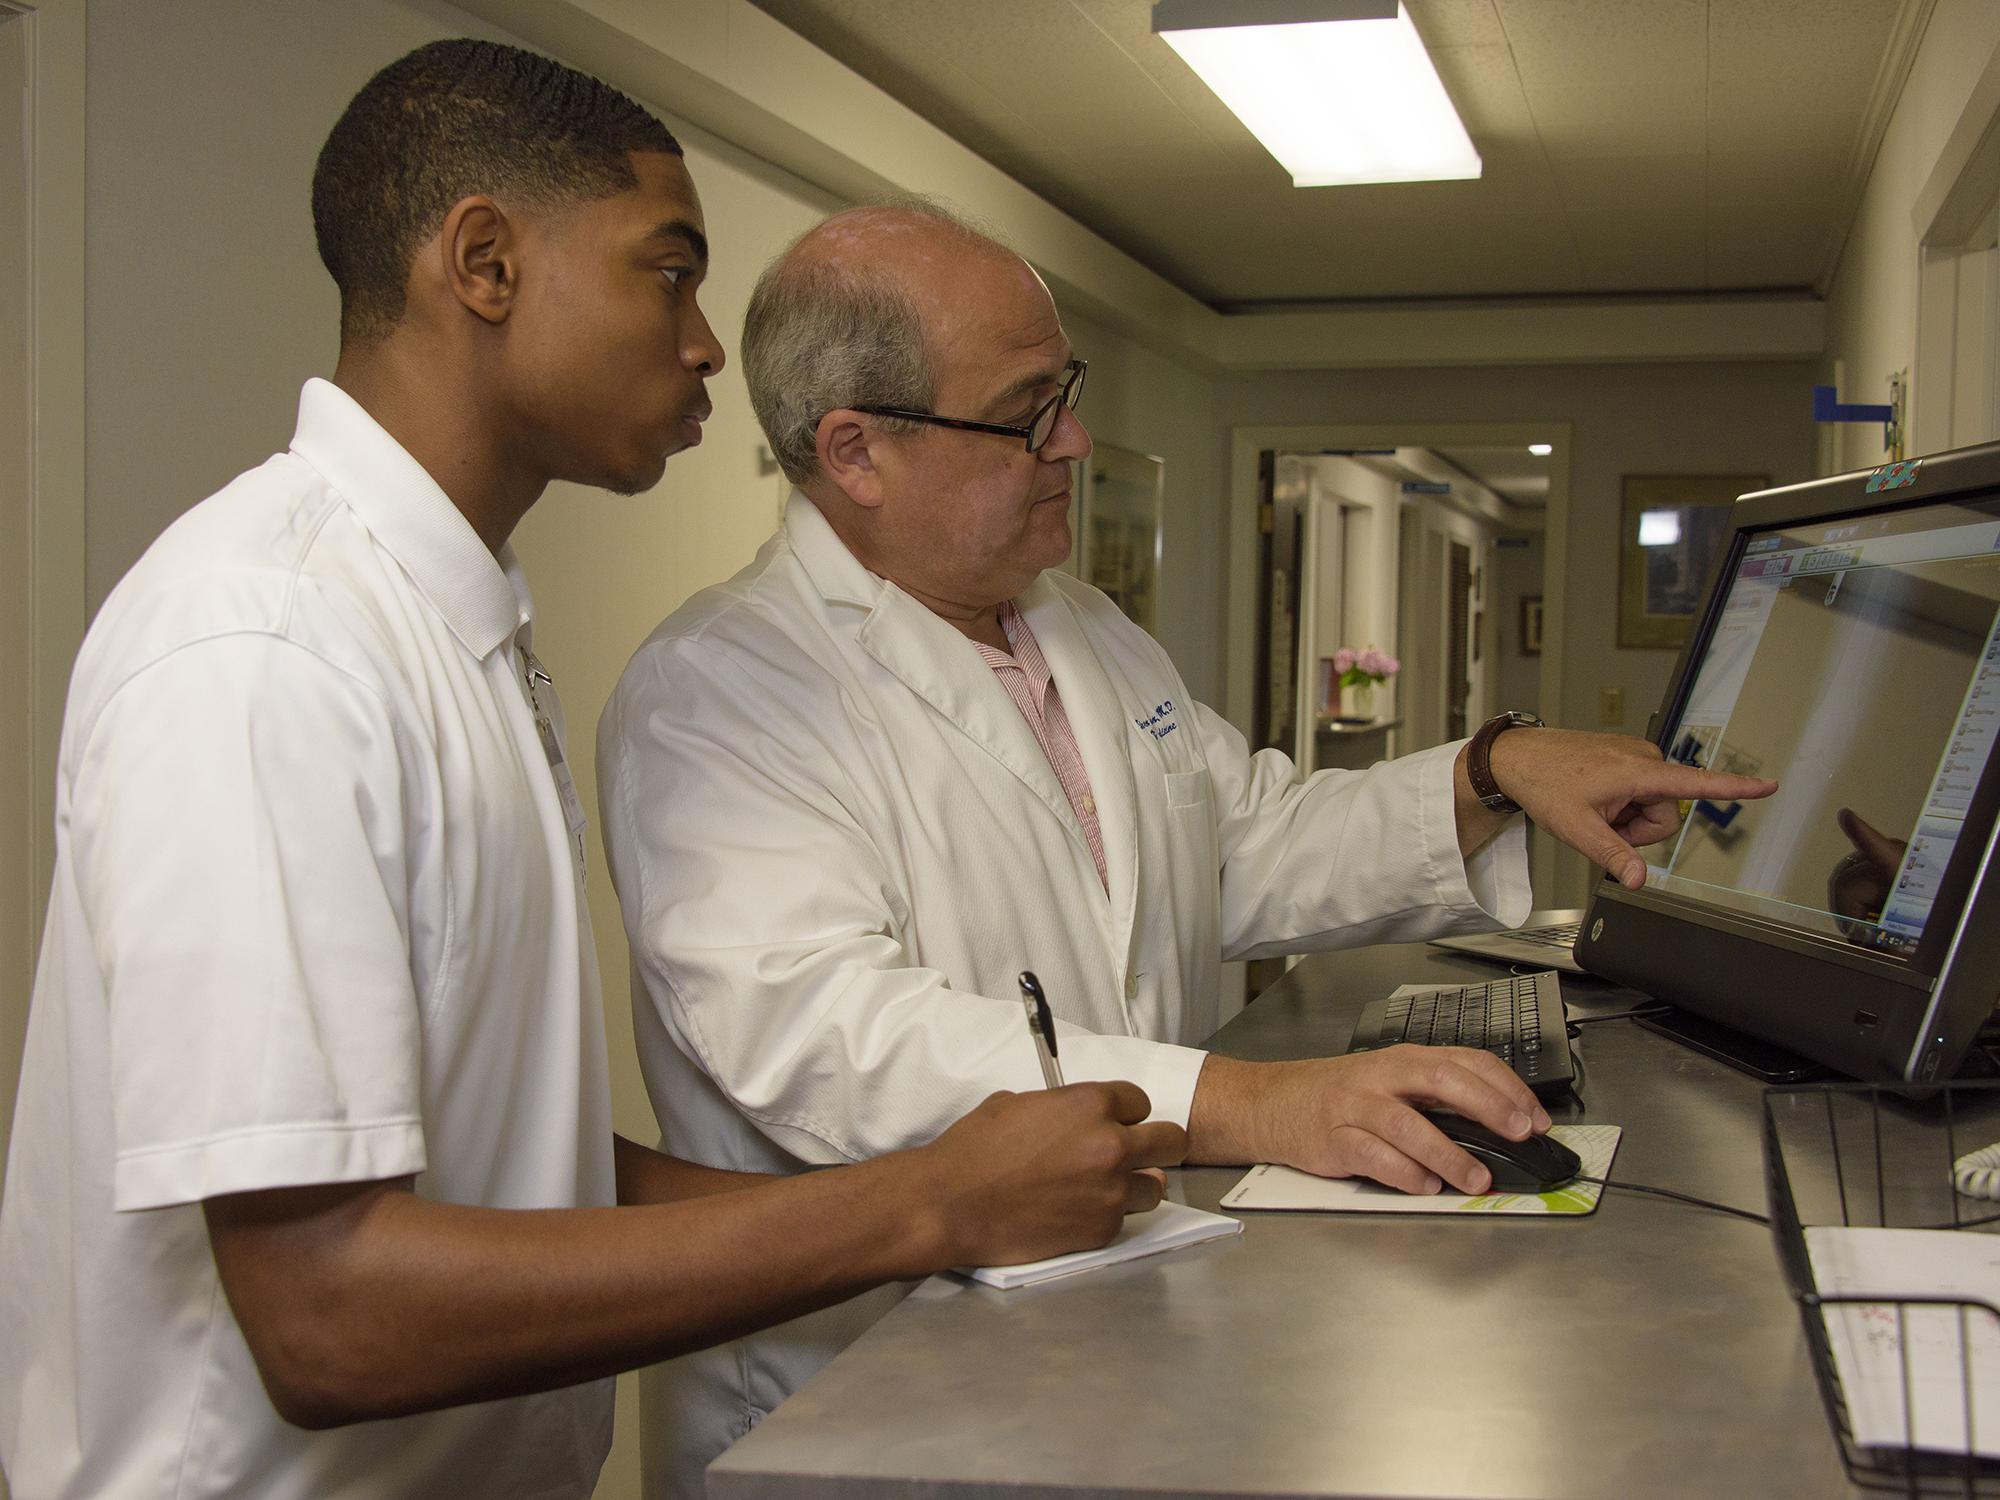 This high school student observes a family practice doctor at work during the 2016 Rural Medical Scholars summer program at Mississippi State University. Applications and program details for 2017 are available online at http://www.extension.msstate.edu/rms/. (Photo by MSU Extension Service/Kevin Hudson)